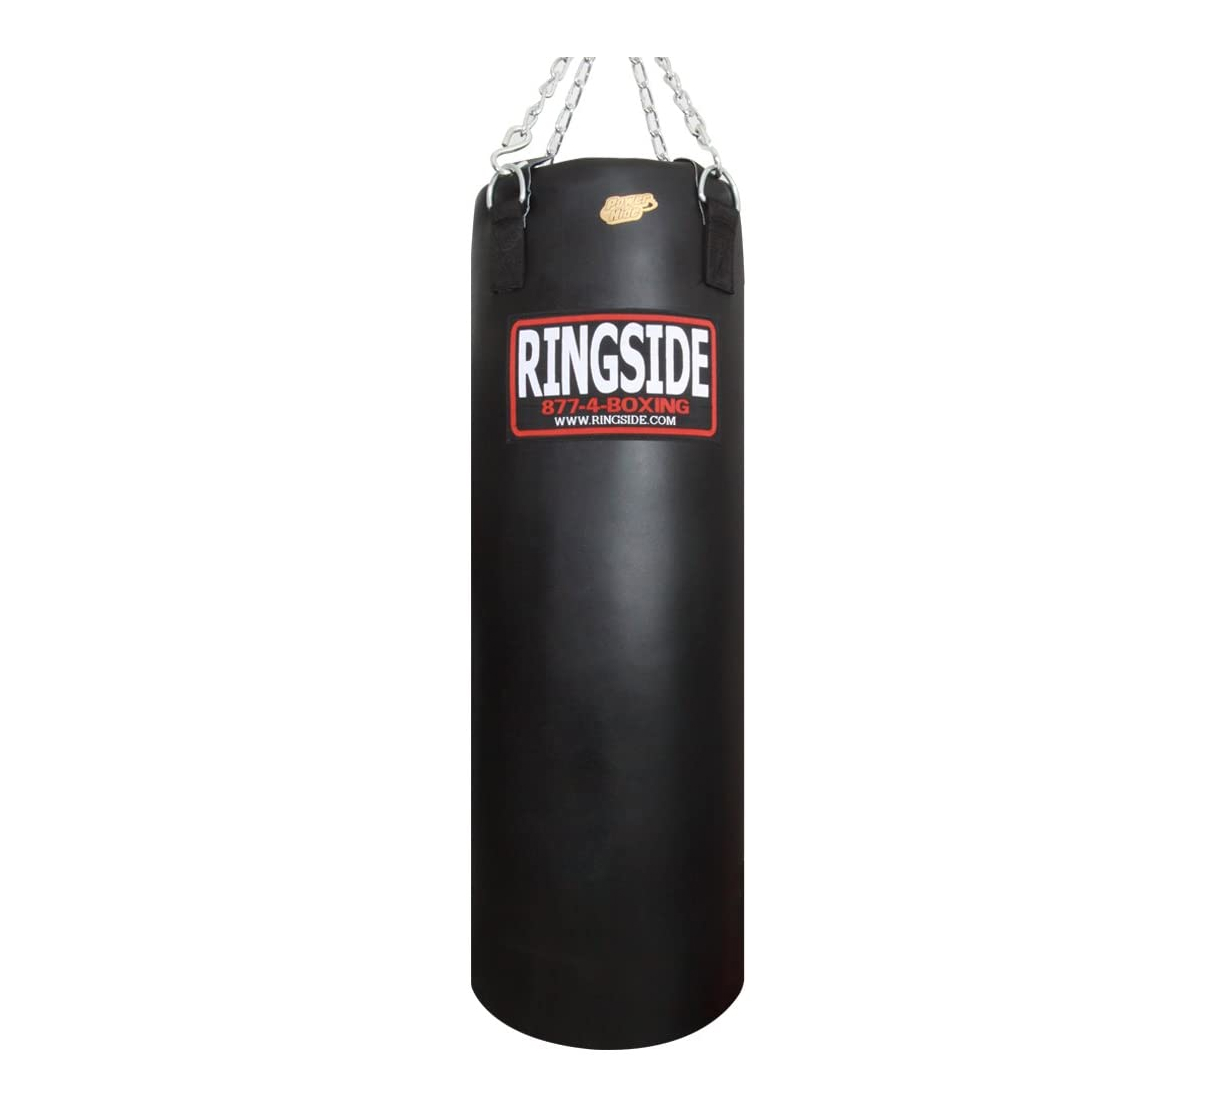 Ringside 100-pound Powerhide for shadow boxing